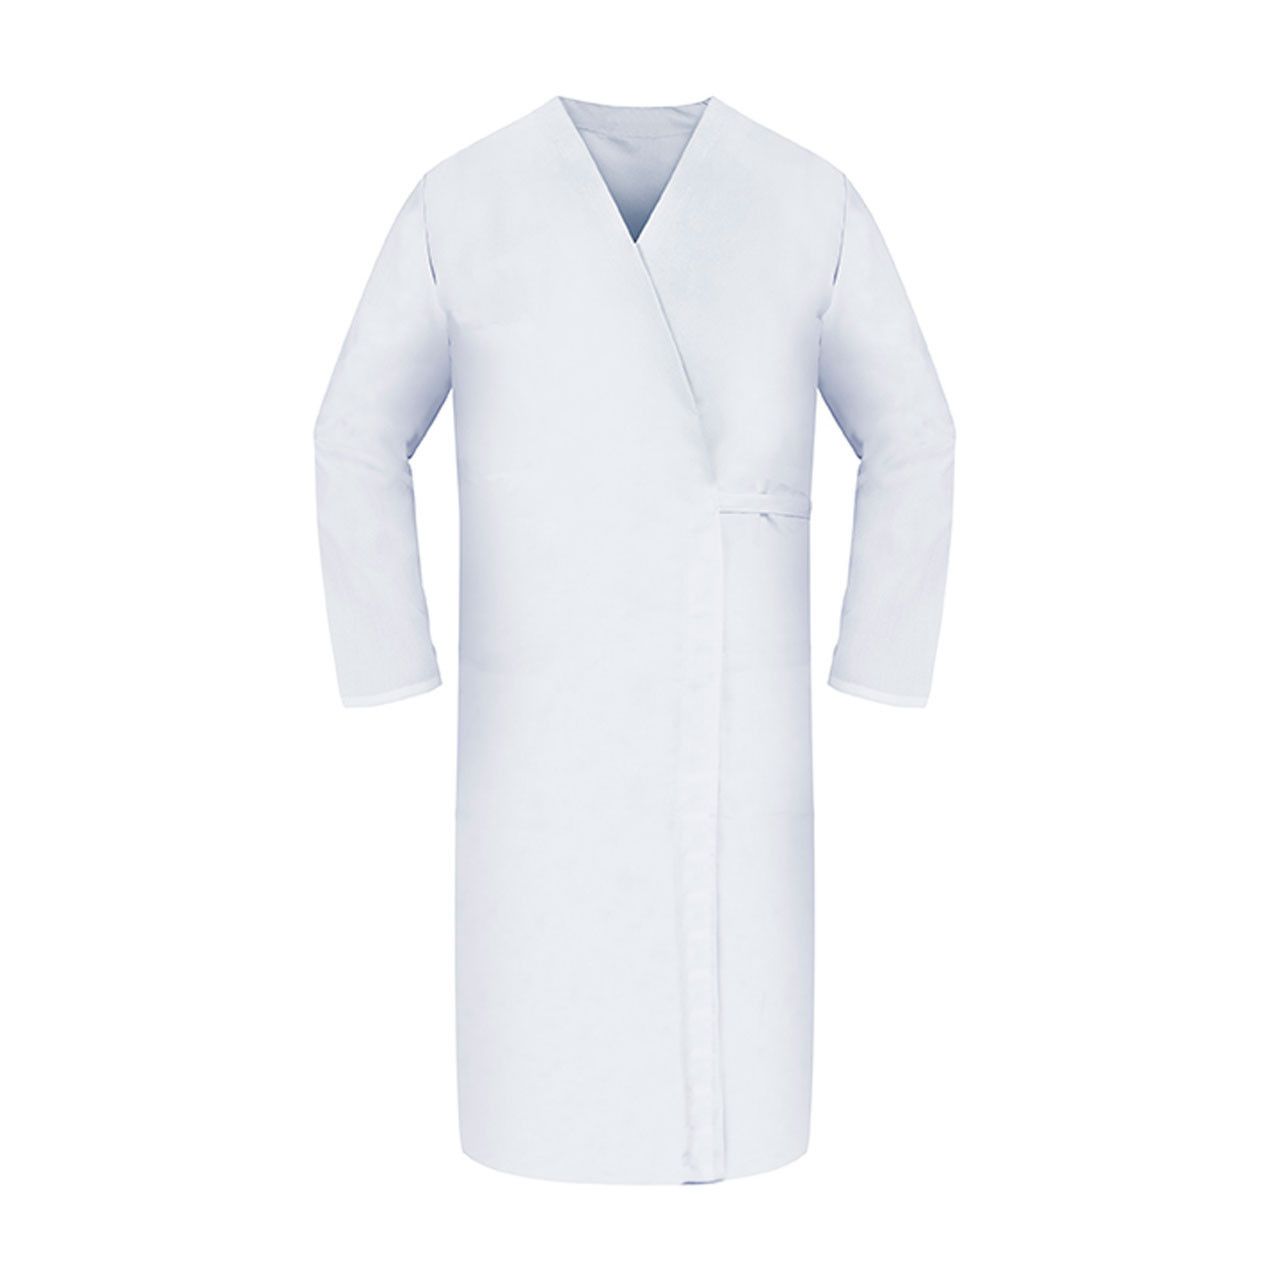 What is the weight of the fabric used in the white smock of HACCP LS Wrap?